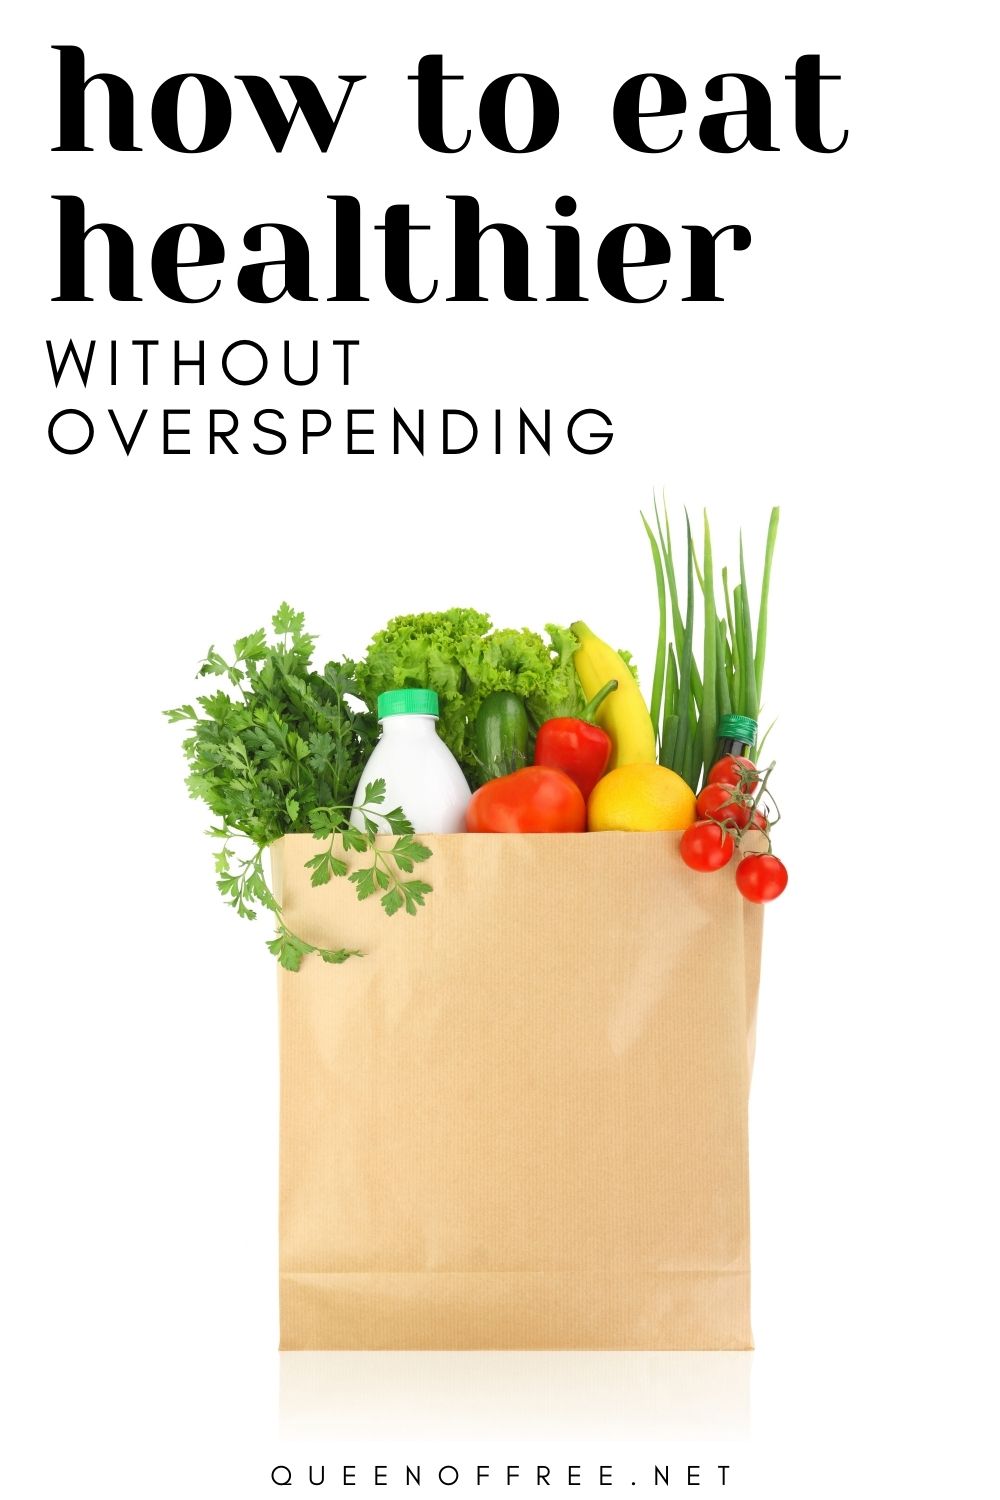 Eat healthier in the new year without overspending. Avoid these 7 tricky pitfalls to accomplish your health and financial goals.